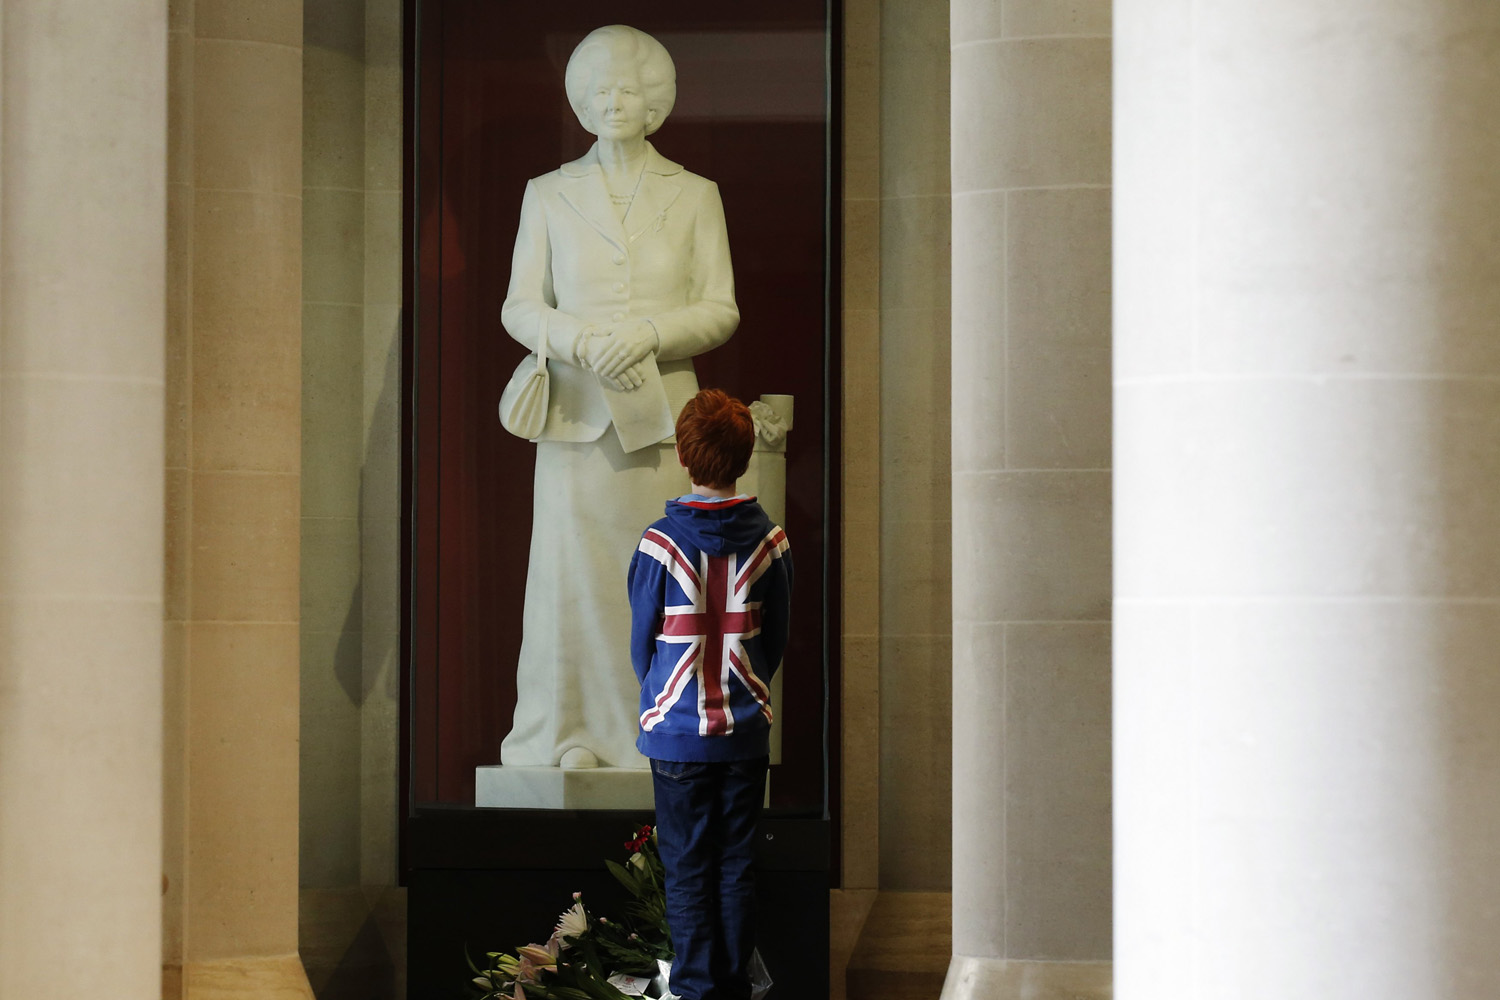 A boy stands in front of a statue of former British prime minister Margaret Thatcher by Neil Simmons, 2001, on display in the Guildhall Art Gallery in the city of London